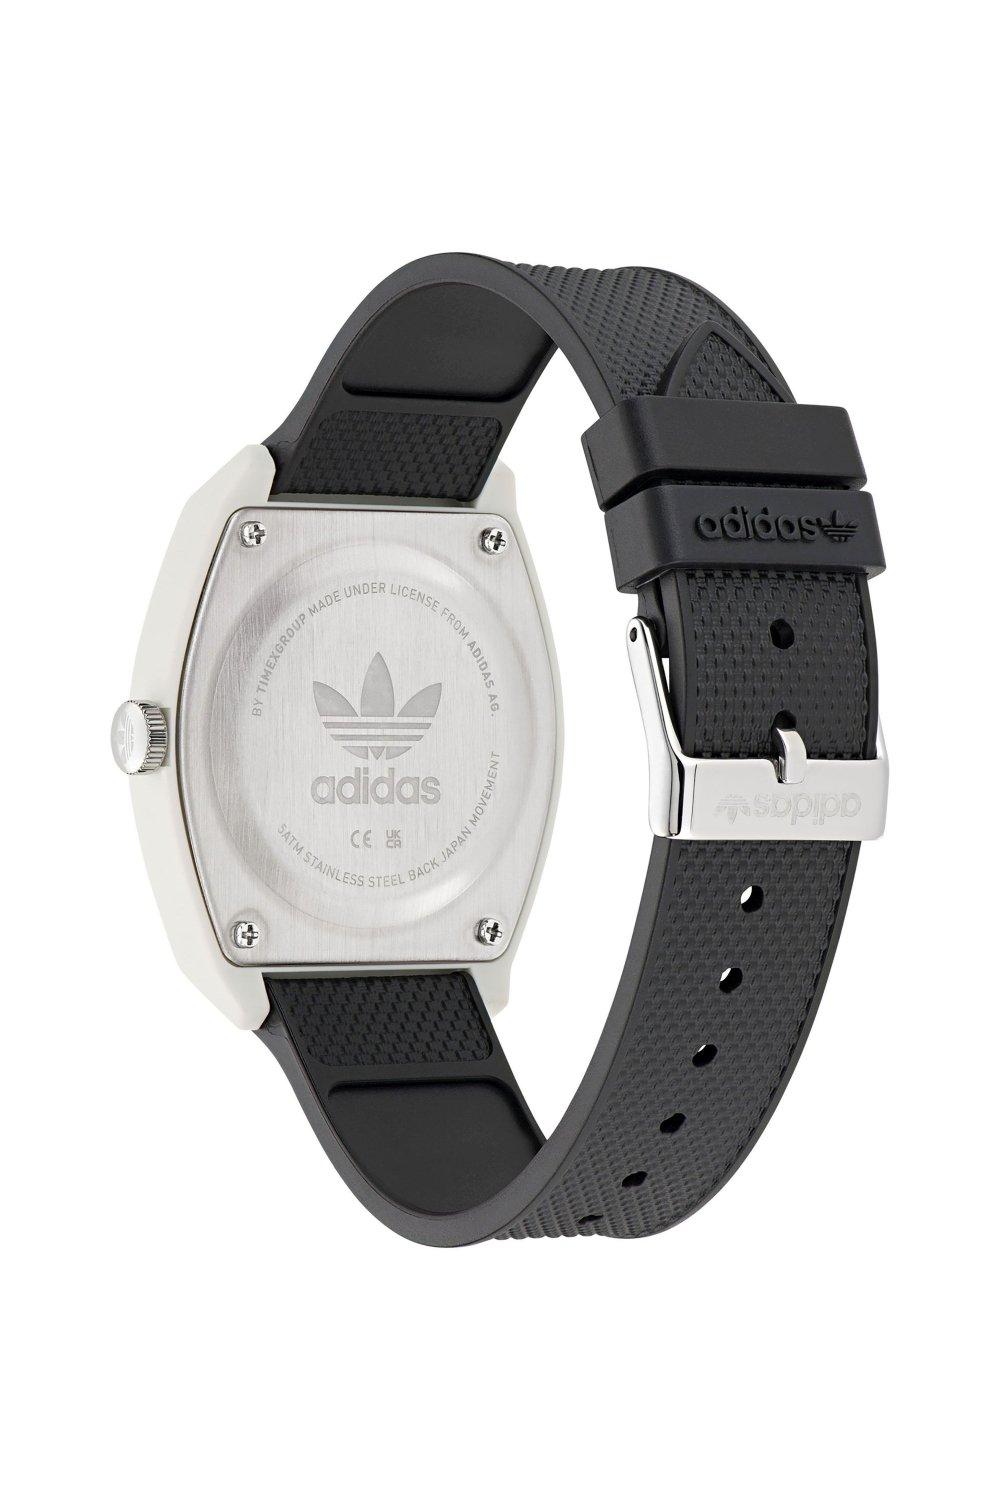 Watches | Project Quartz adidas - Originals Aost23550 Watch Fashion | Two Analogue Plastic/resin